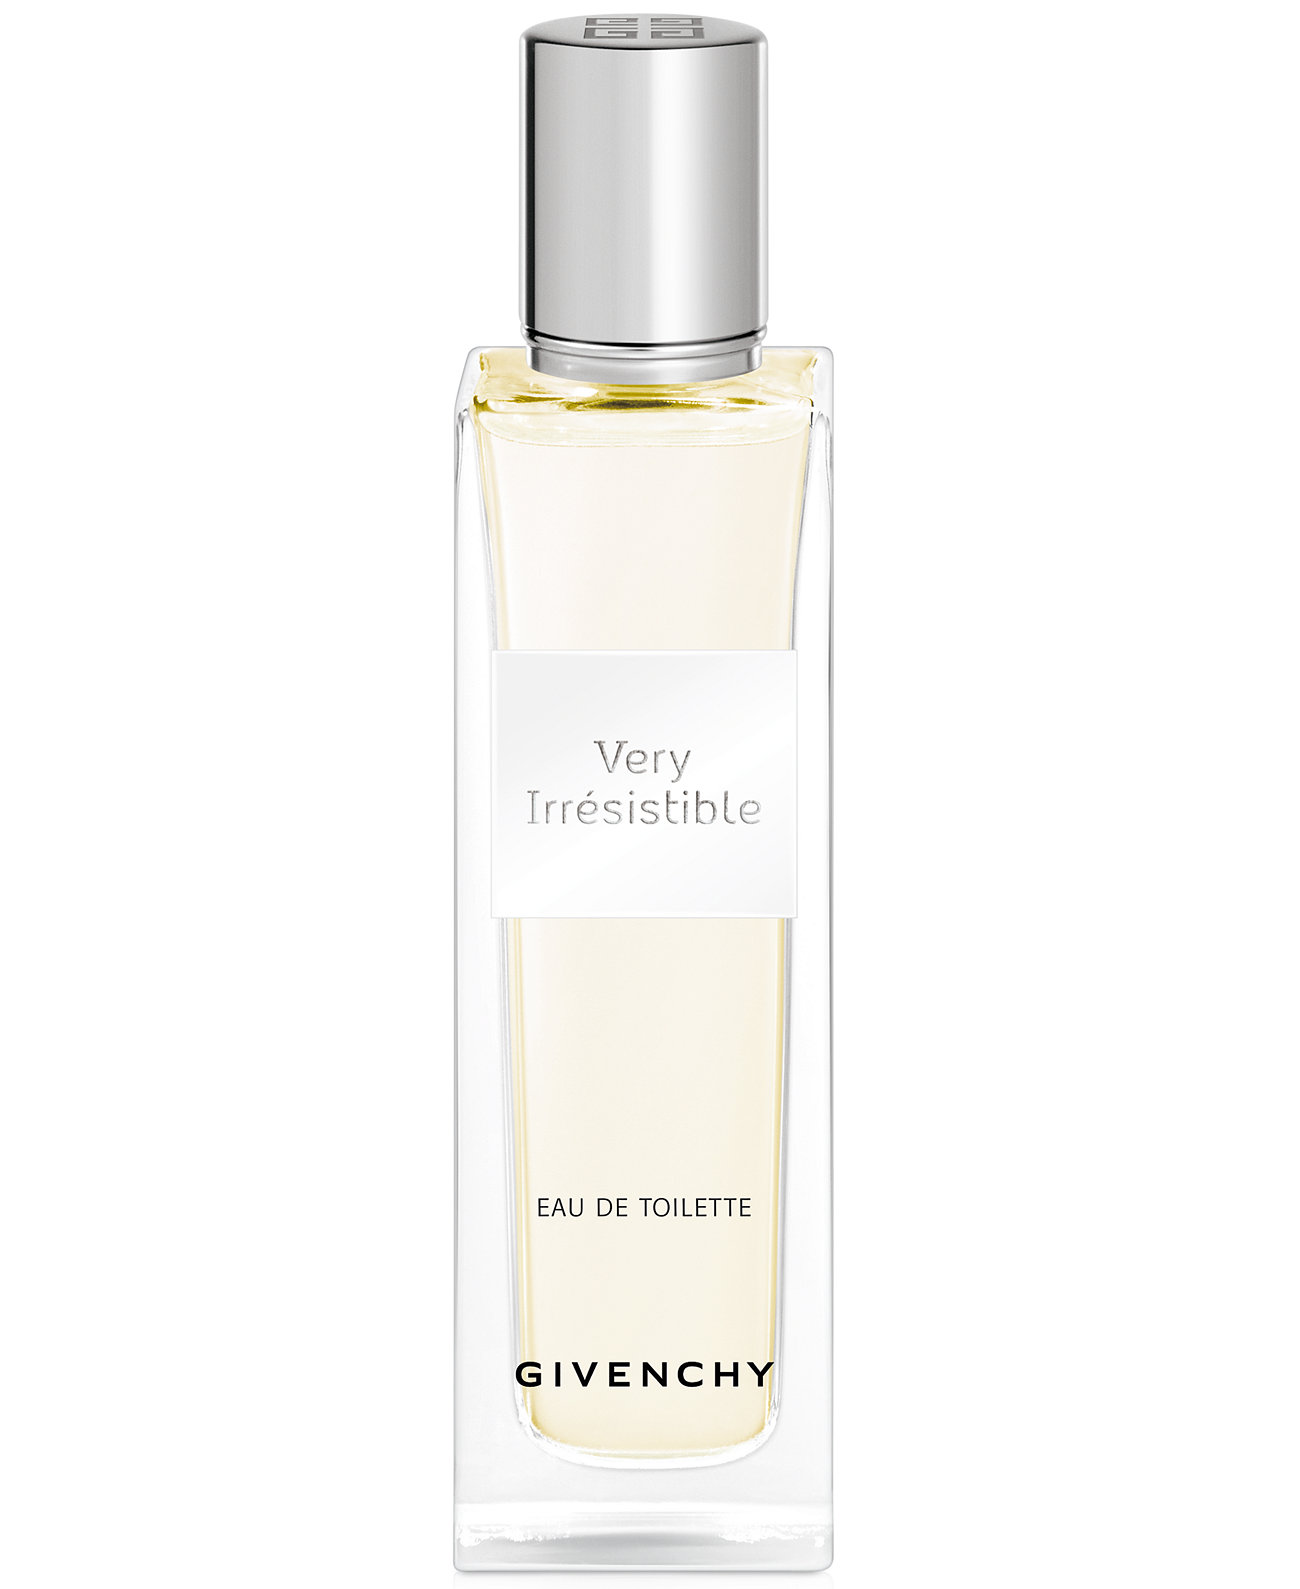 Givenchy irresistible toilette. Givenchy Gentleman 15ml. Givenchy irresistible 15мл. Givenchy Gentleman 2017 15 ml. Givenchy irresistible EDT Toilette.